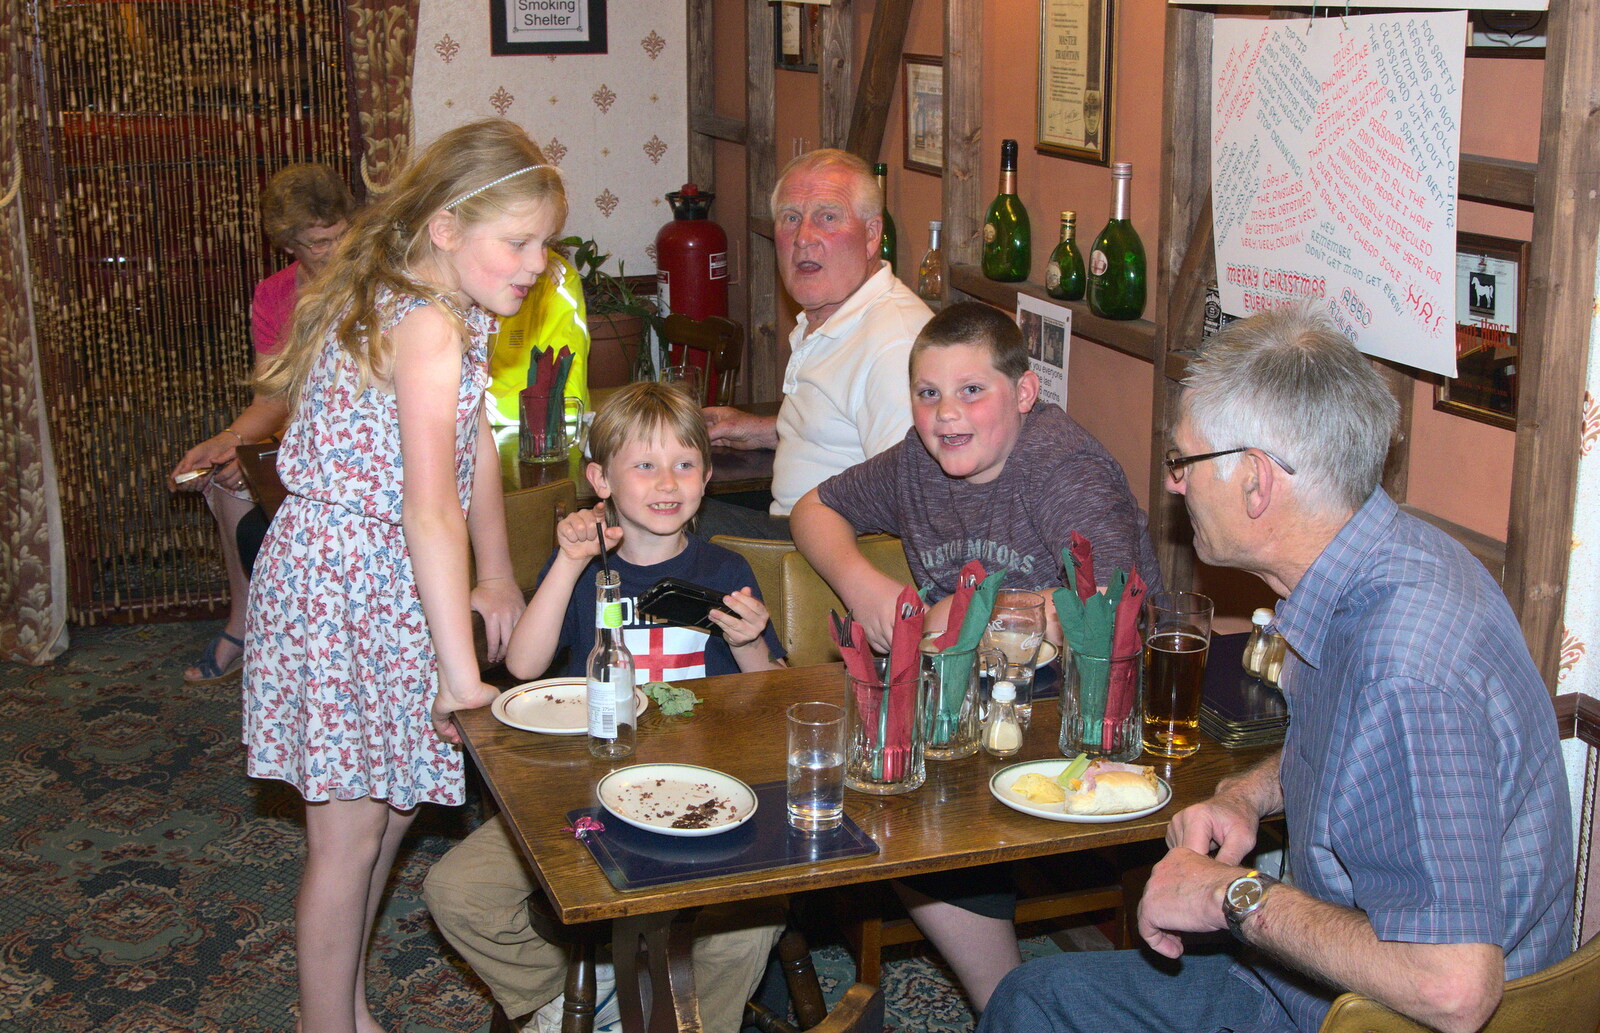 Uncle Mick is on the Sprog table from A Retirement: The Last Night of The Swan Inn, Brome, Suffolk - 3rd June 2017